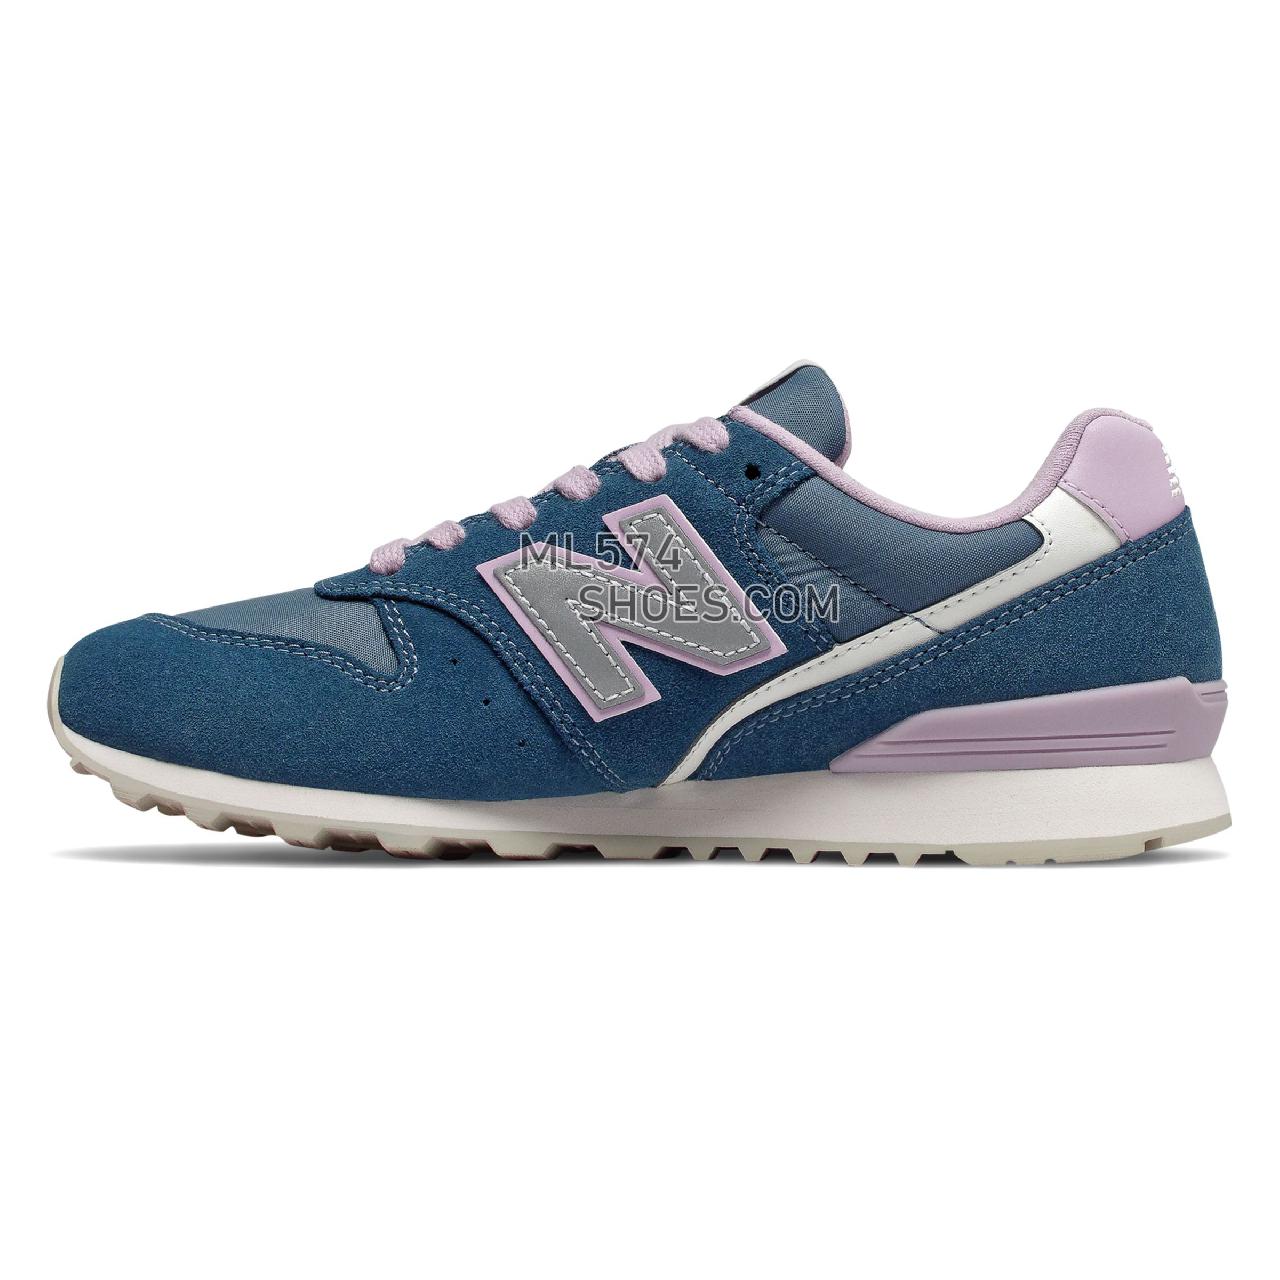 New Balance 996 - Women's Classic Sneakers - Techtonic Blue with Oxygen Pink - WL996AE